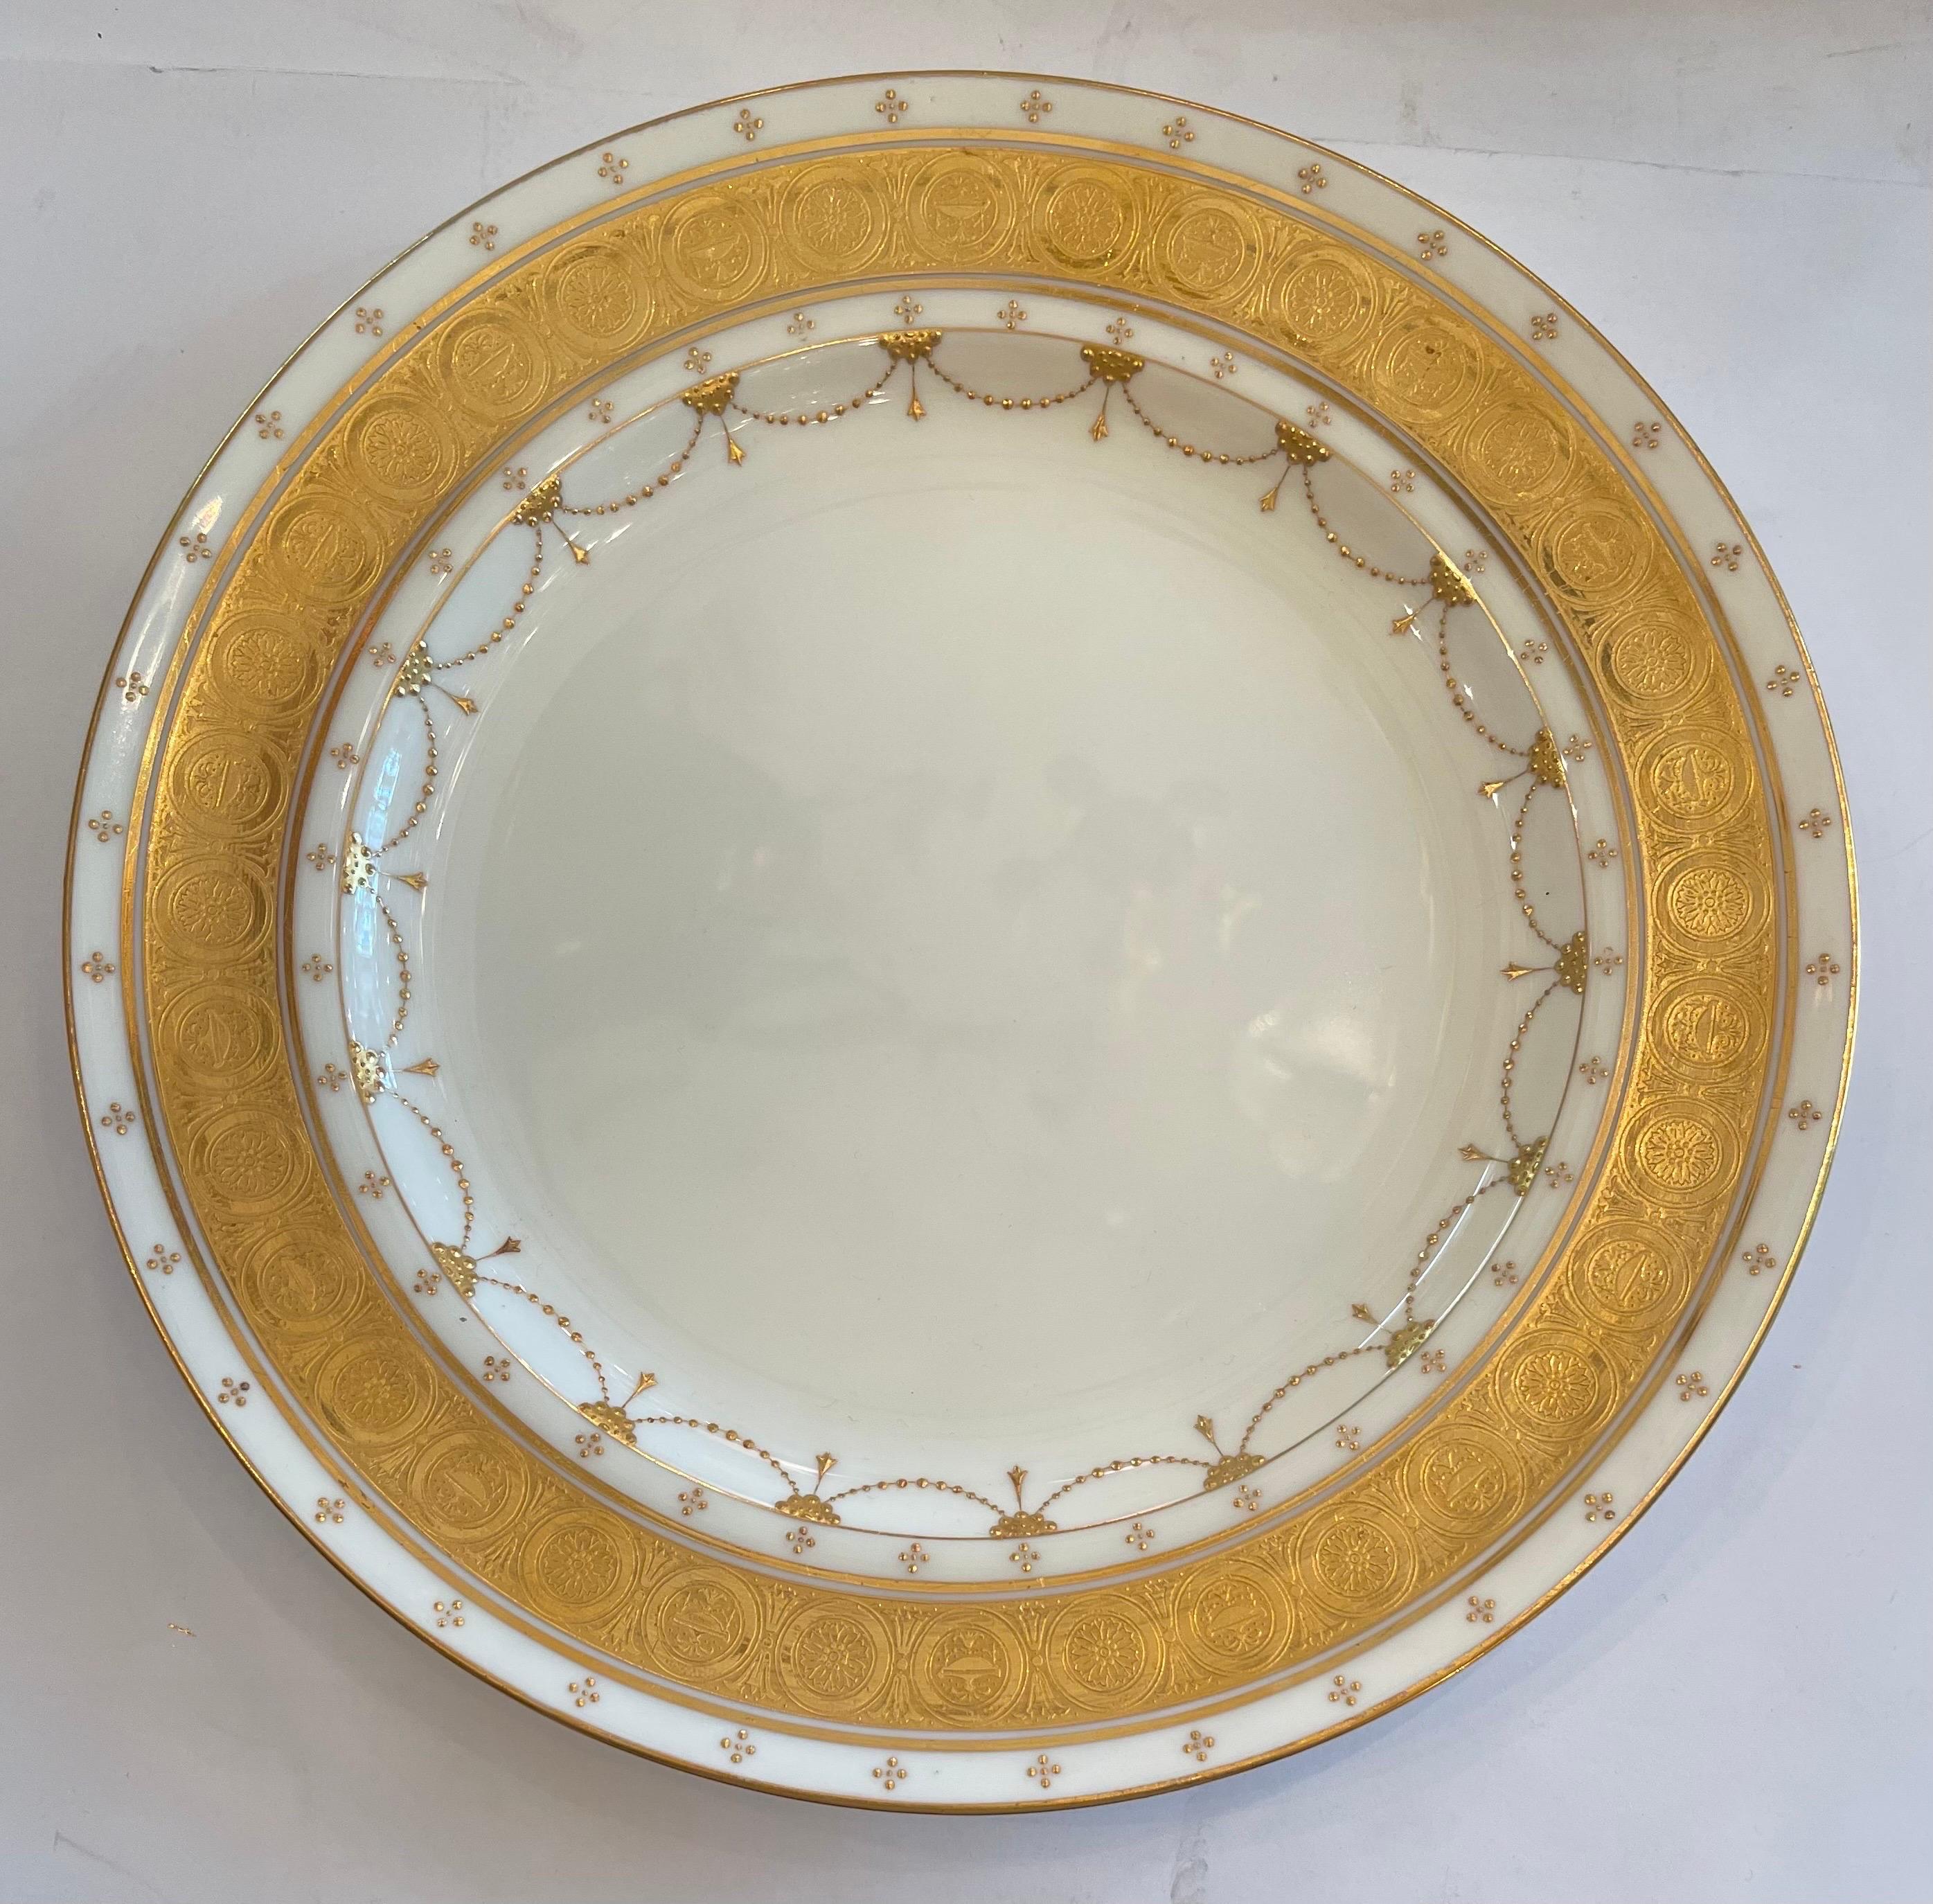 A Wonderful Minton Set Of 11 Service Dinner Plates With Encrusted Raised Gold Urn Rim And Beaded Swag Design Border.